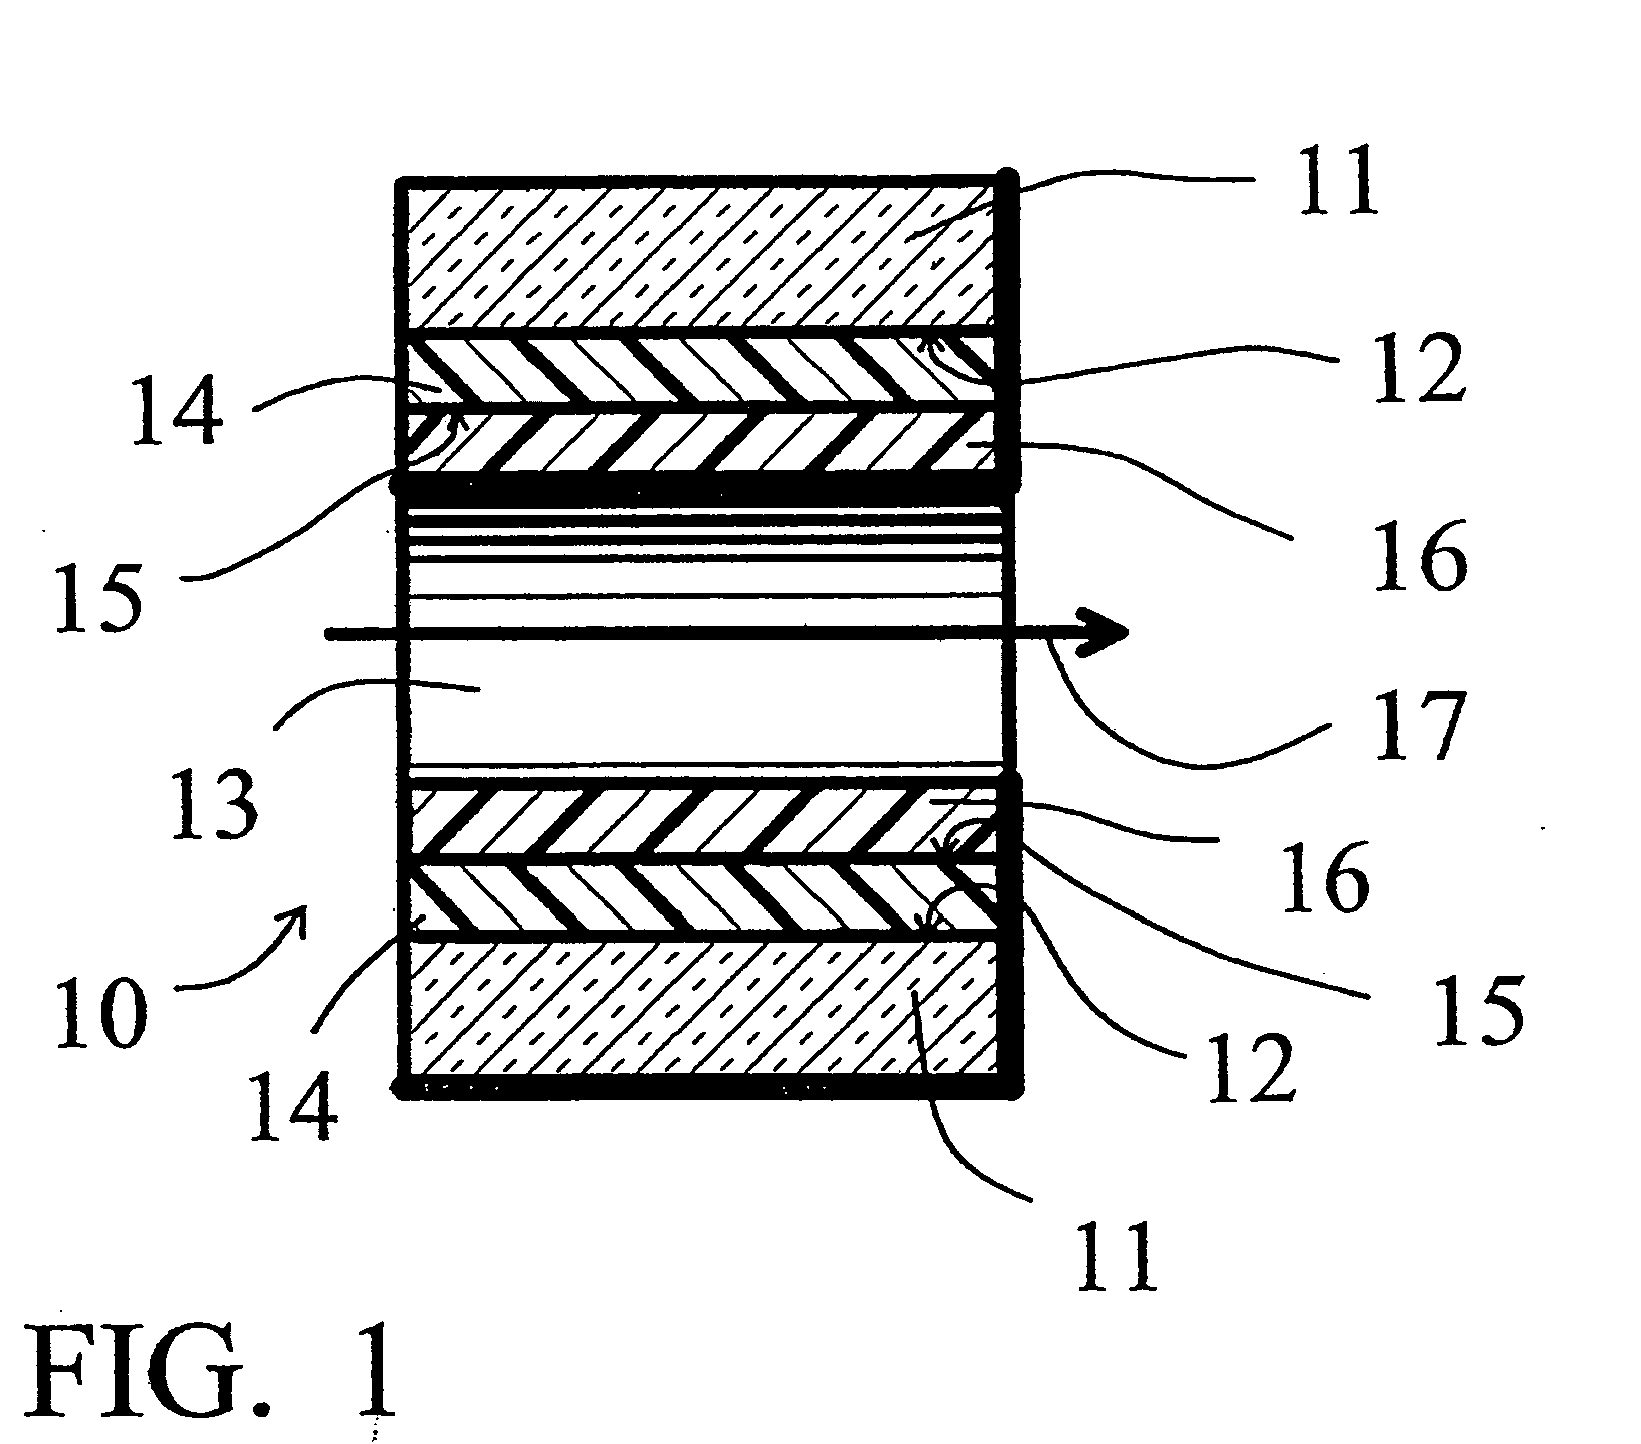 Deactivated surfaces for chromatographic separations and methods of making and using the same